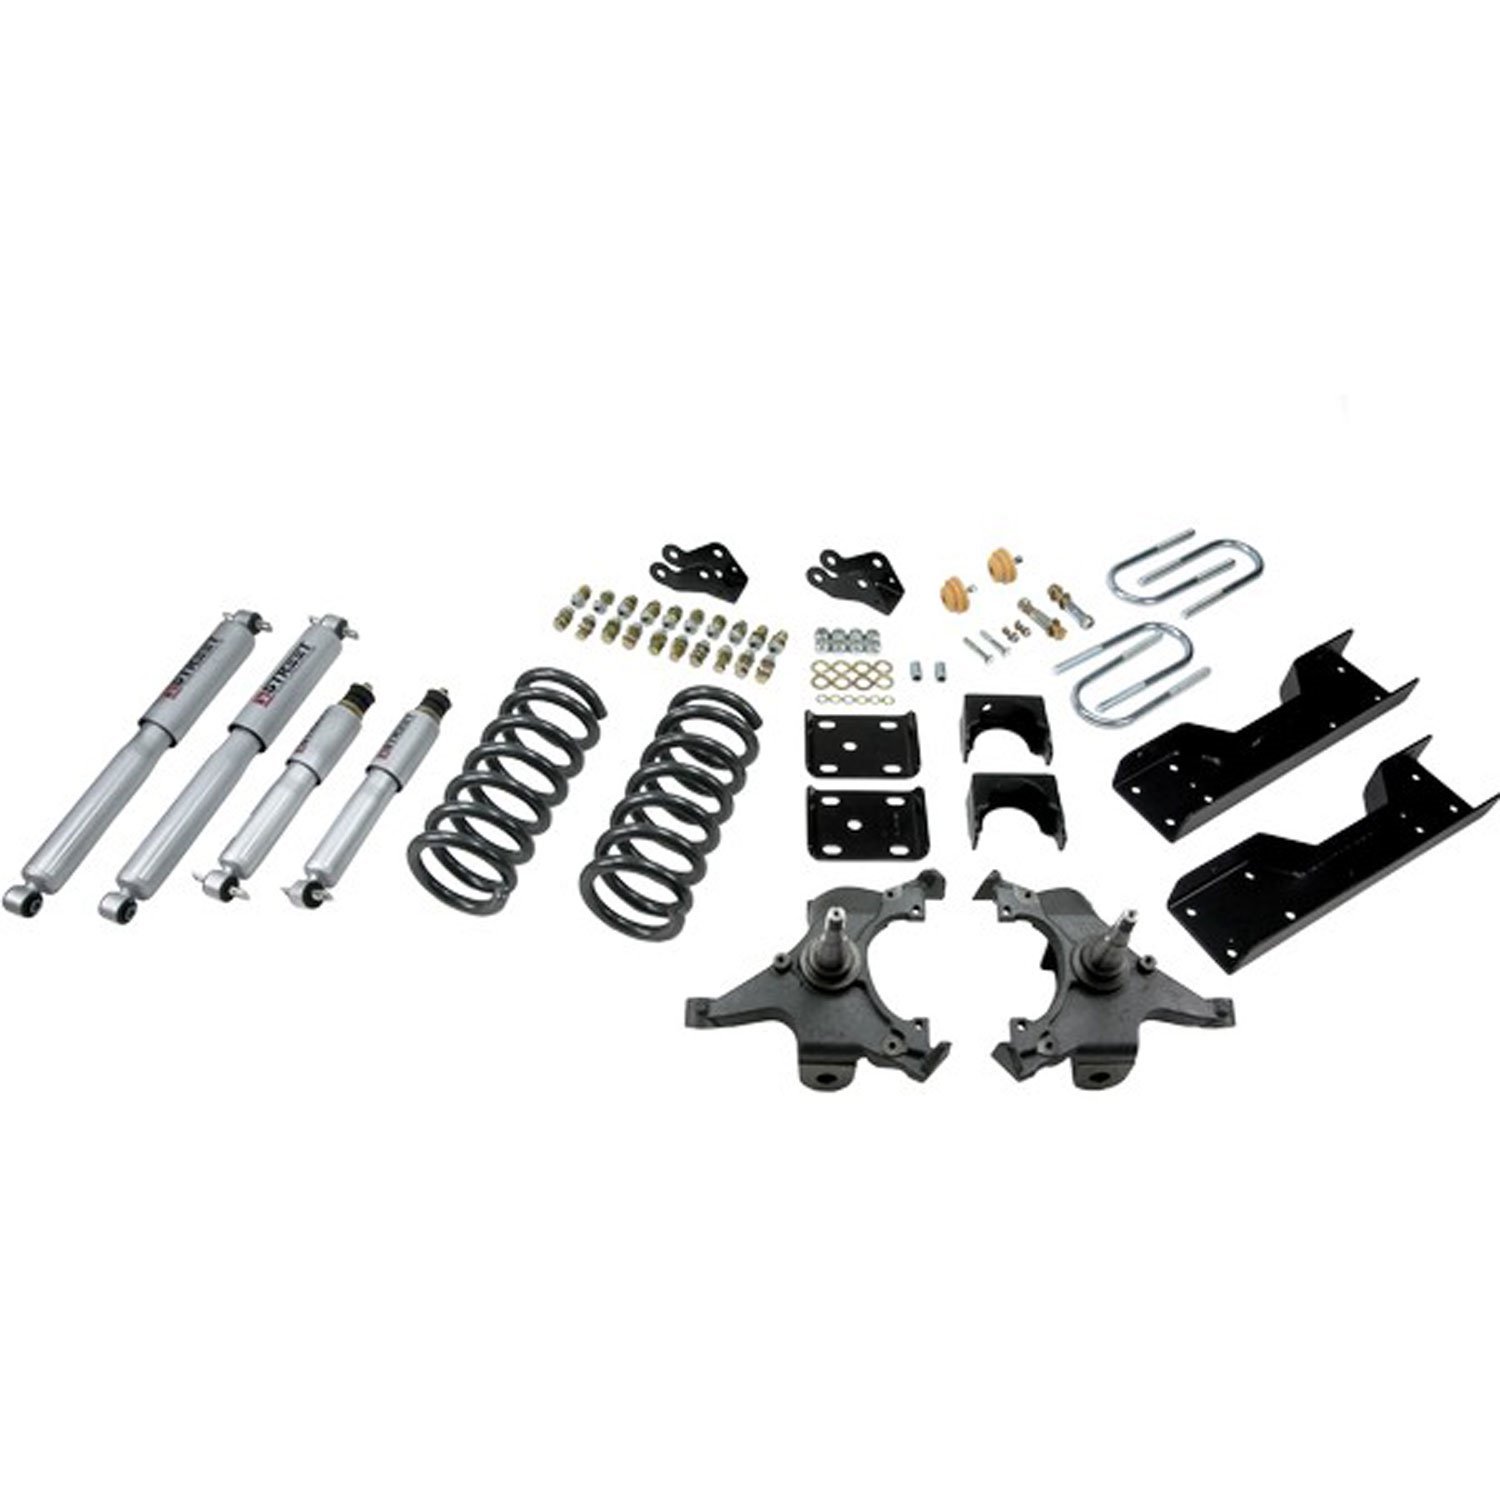 Complete Lowering Kit for 1988-1998 GM C2500/1990-1994 Chevy